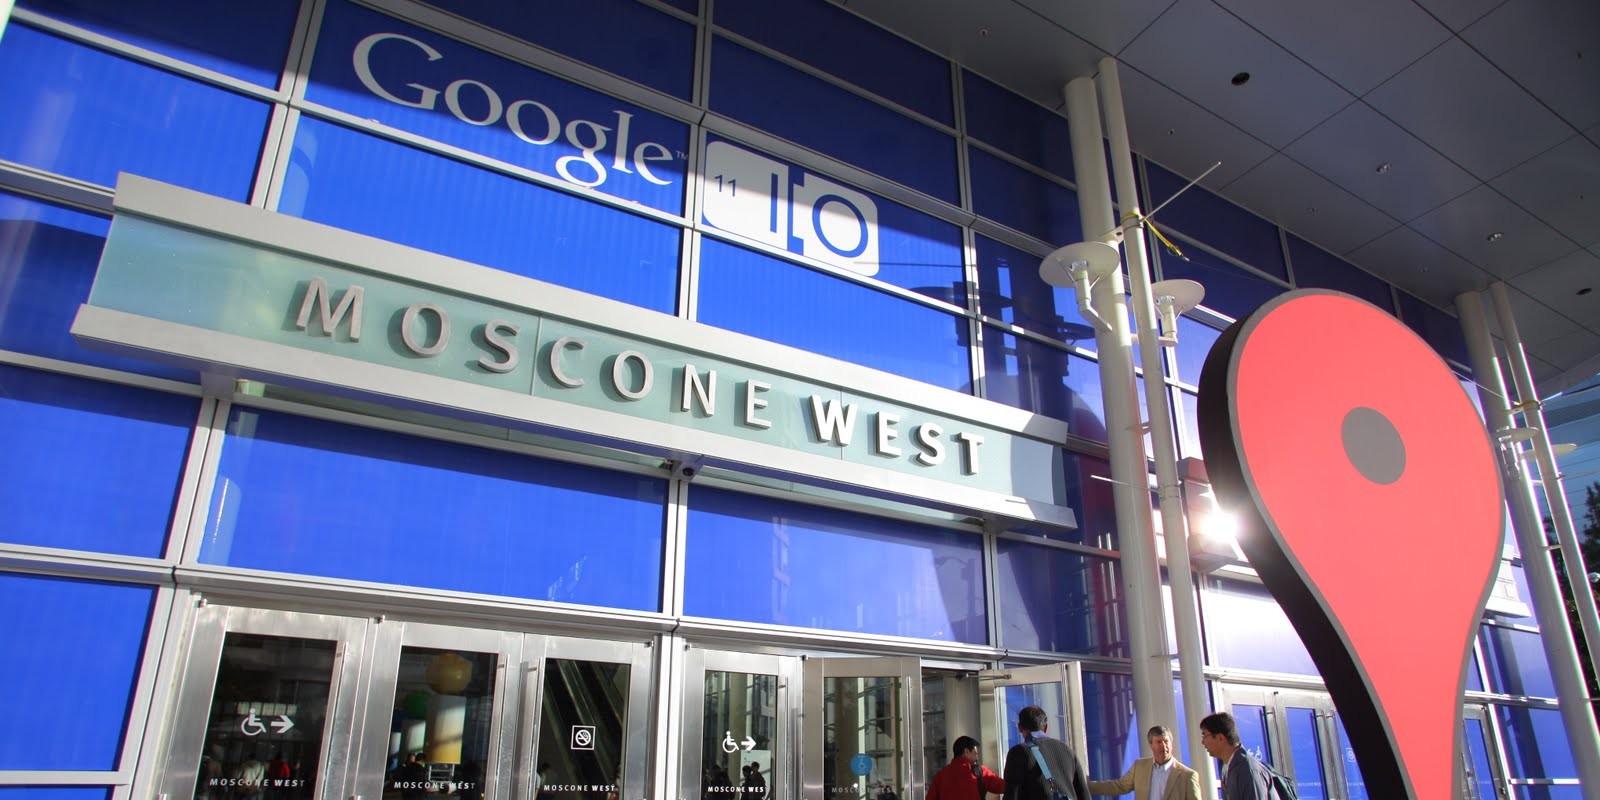 Image (6) Google-IO-2011-Moscone-West-entrance.jpg for post 211